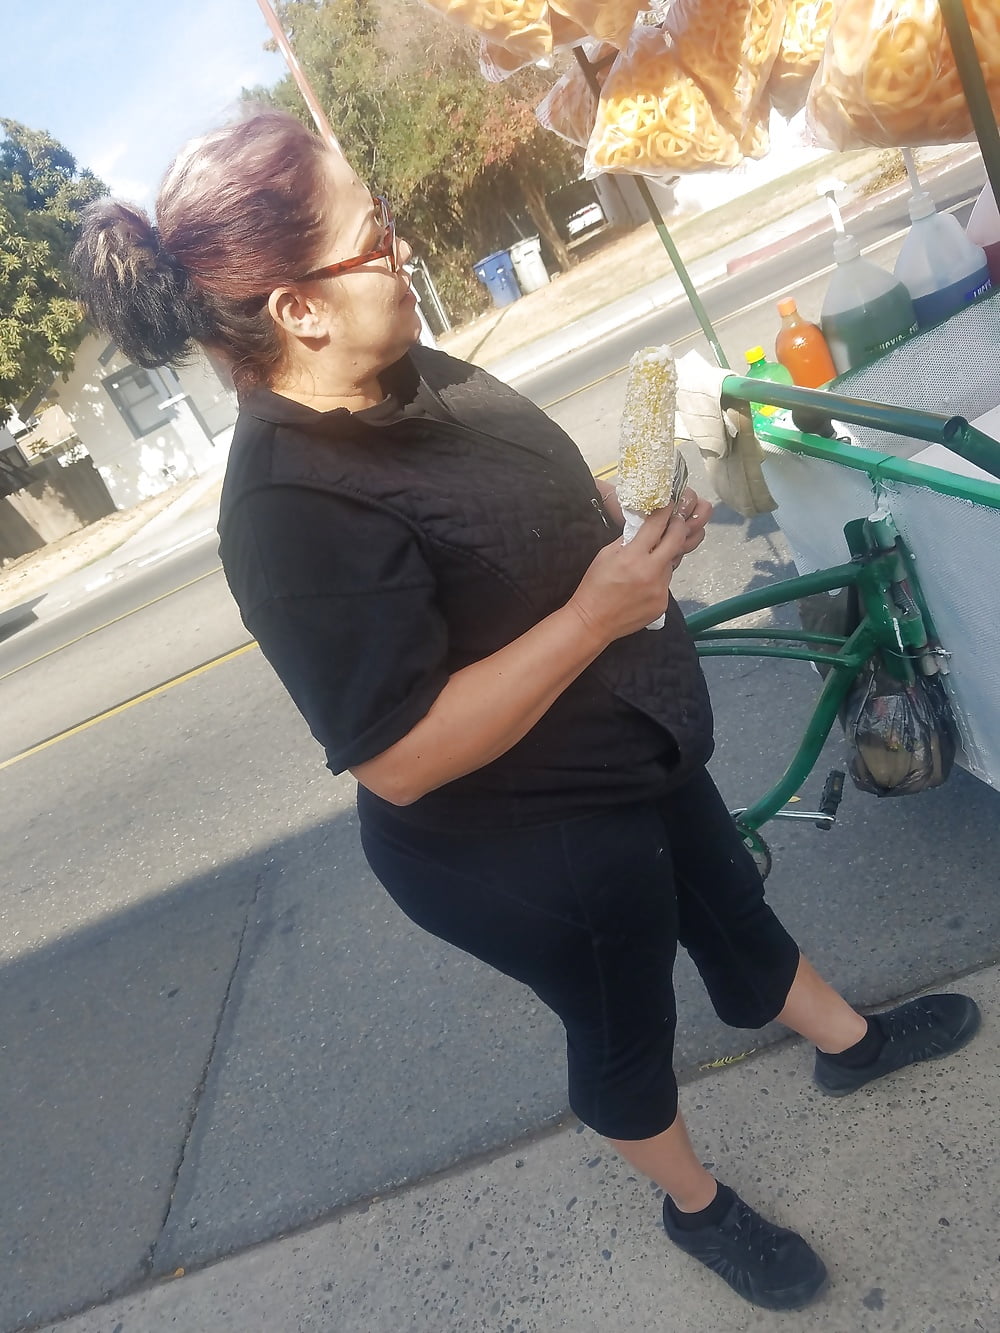 Mexican lady down the street (10/11)